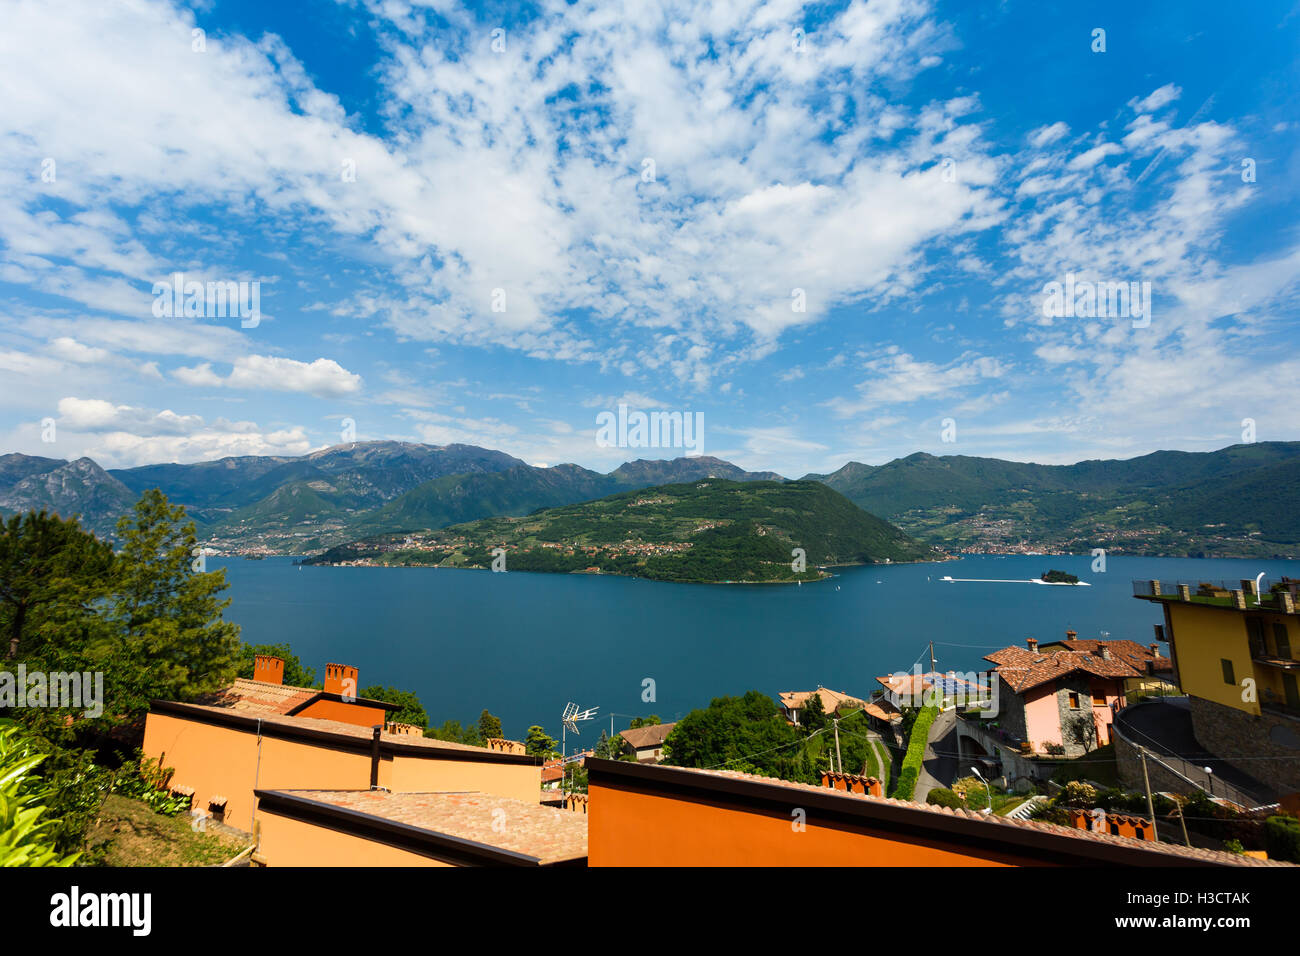 Landscape of Monte Isola Island in North Italy Stock Photo